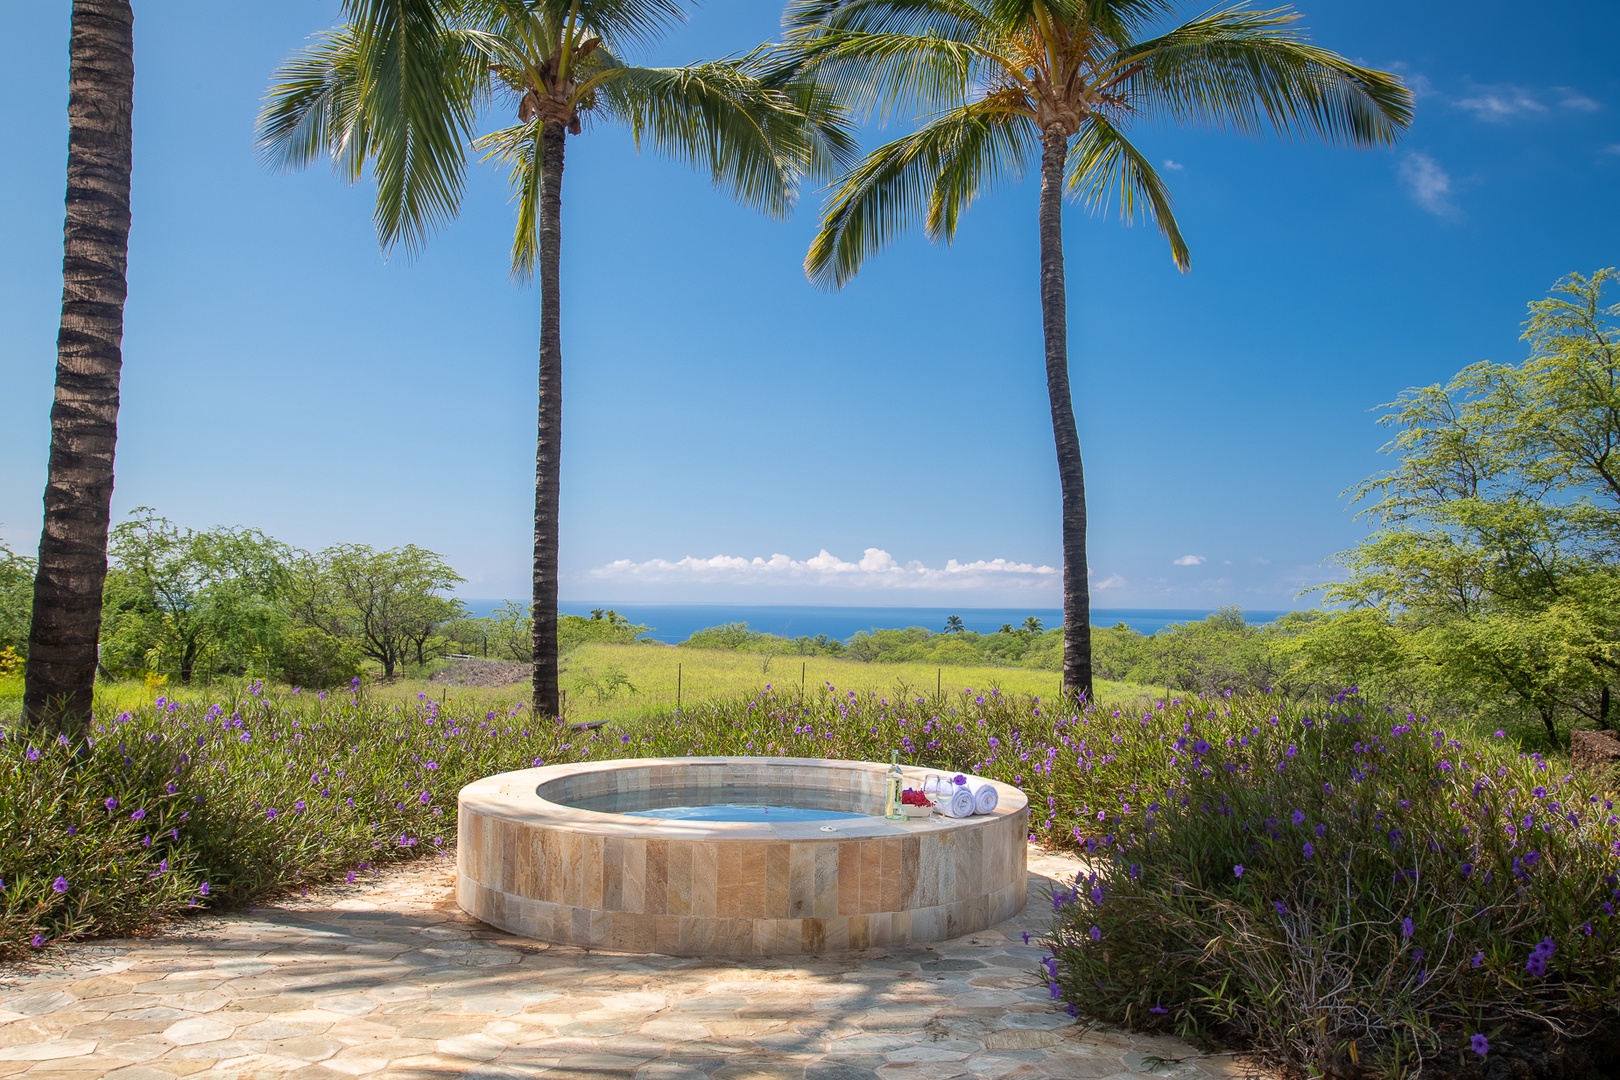 Kamuela Vacation Rentals, Olomana Hale at Kohala Ranch - Personal tub overlooking the Ocean is a dream come true!